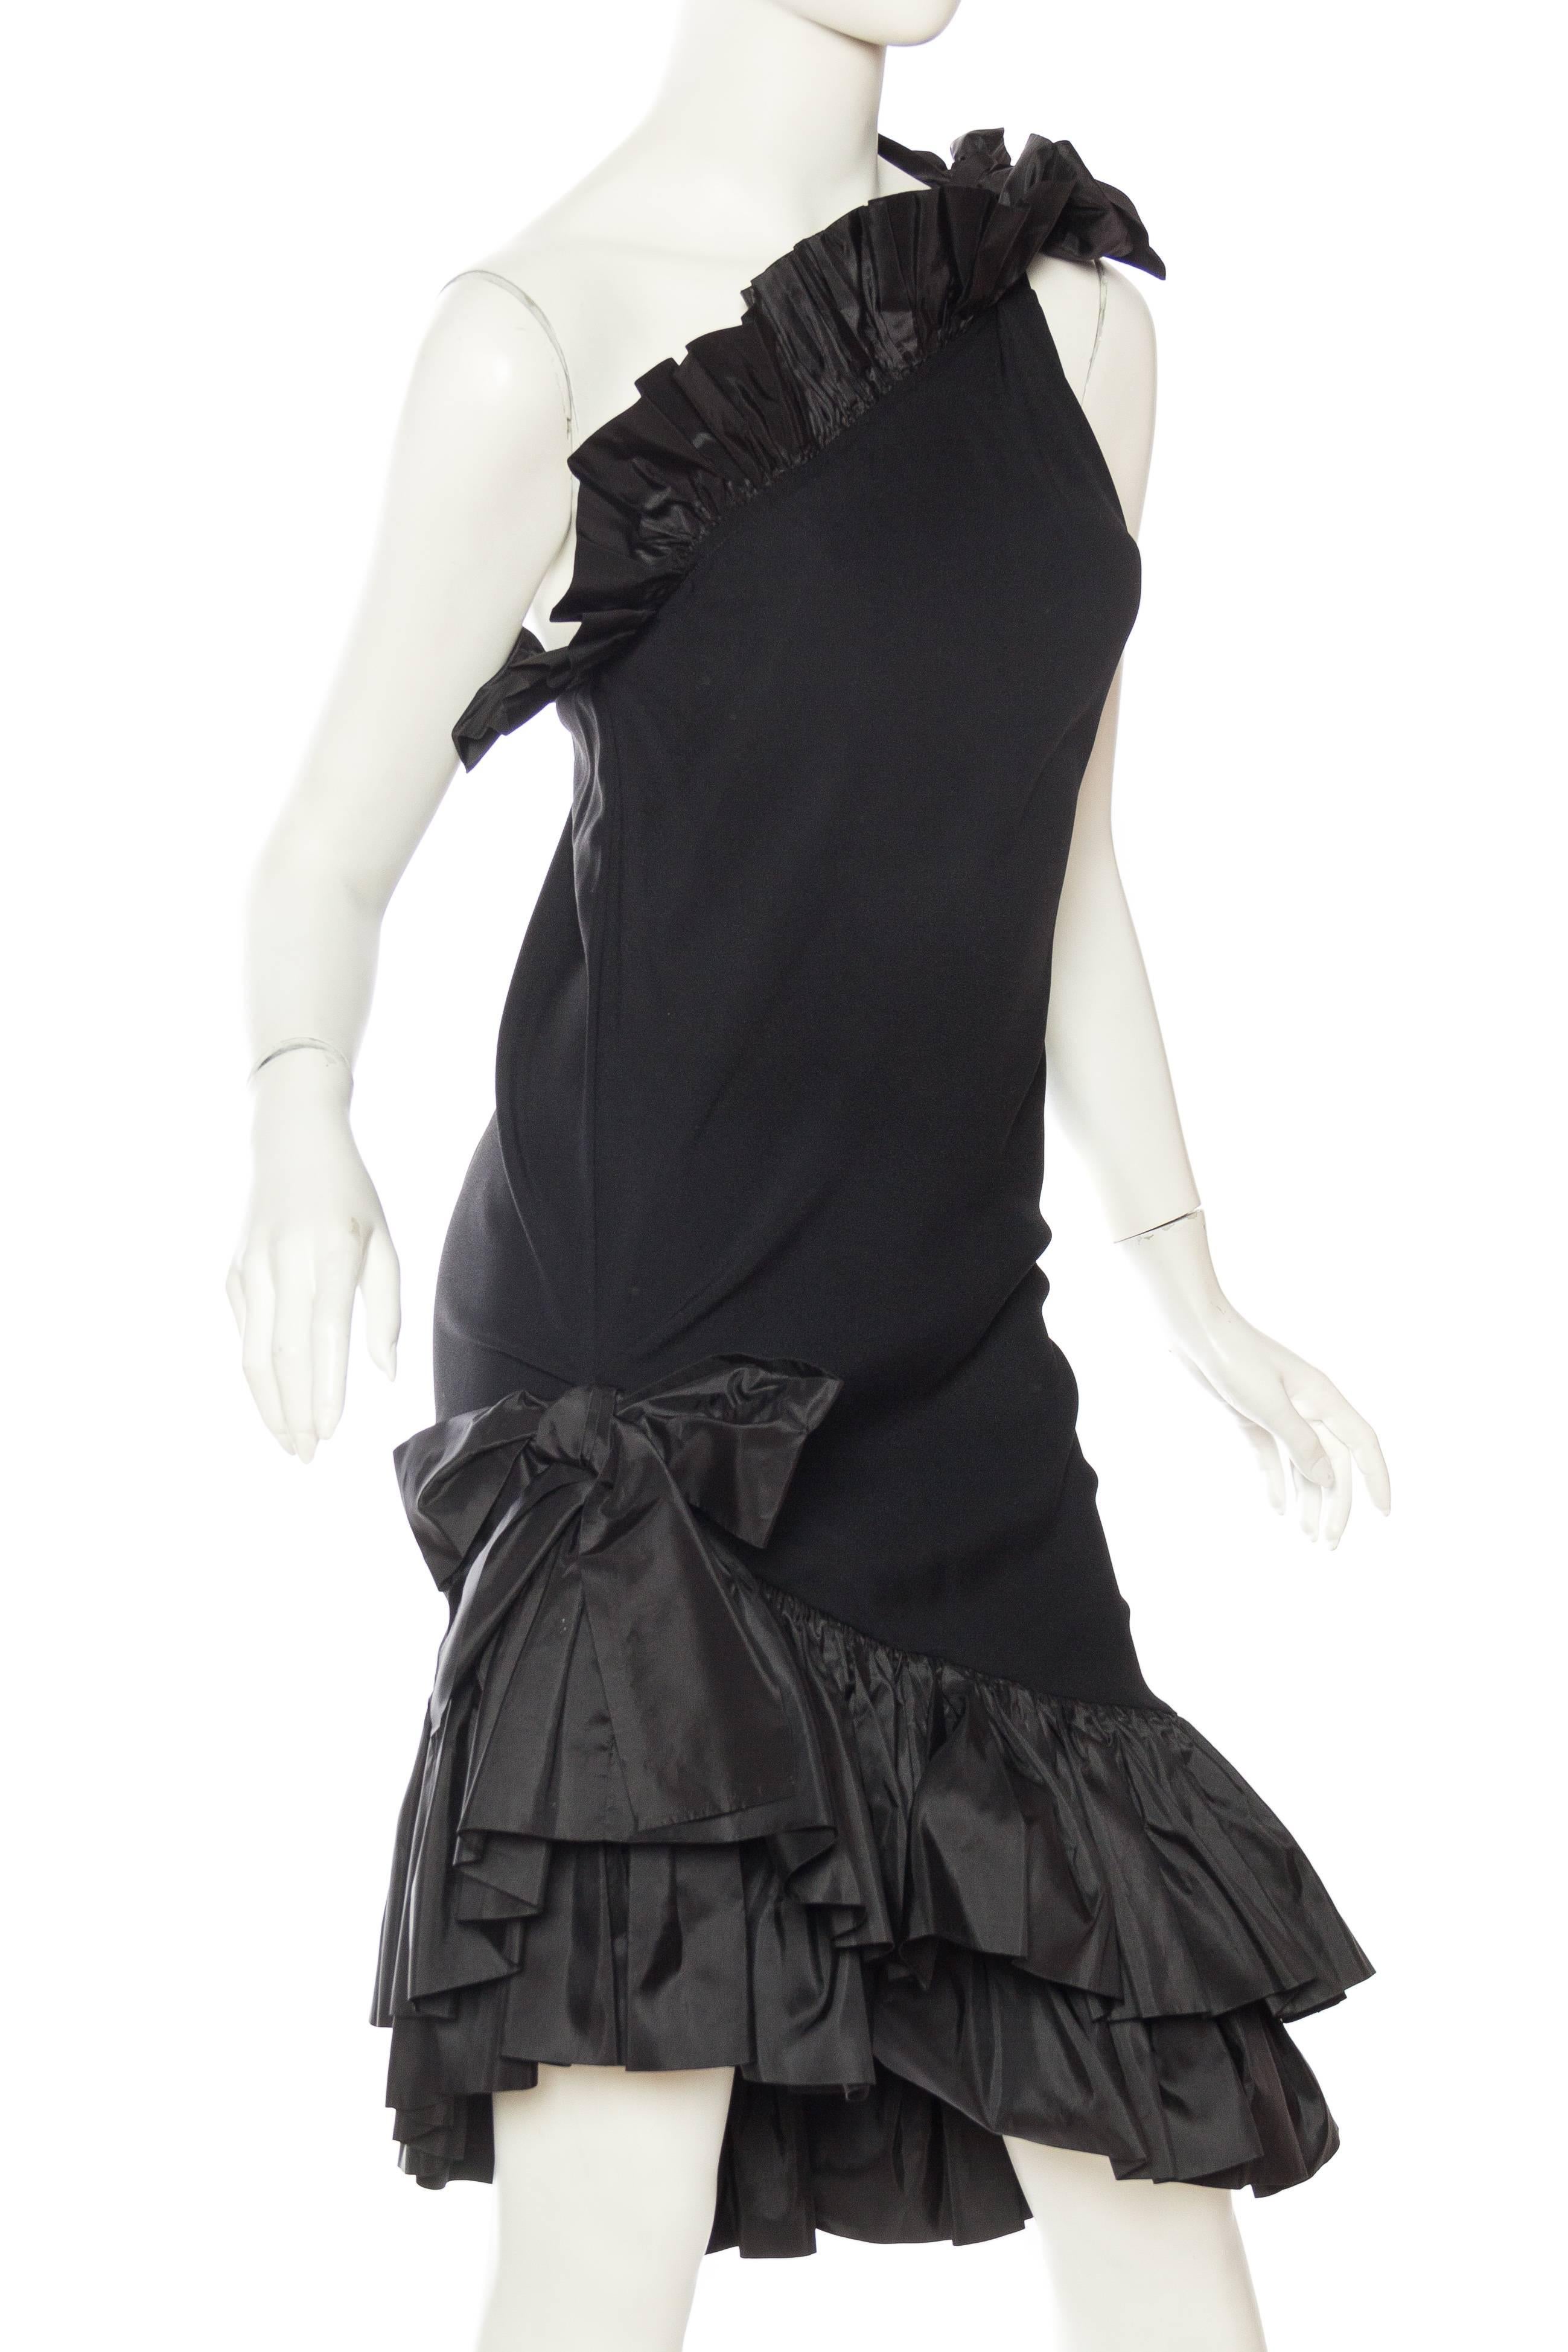 Saint Laurent Taffeta & Crepe Dress In Excellent Condition In New York, NY